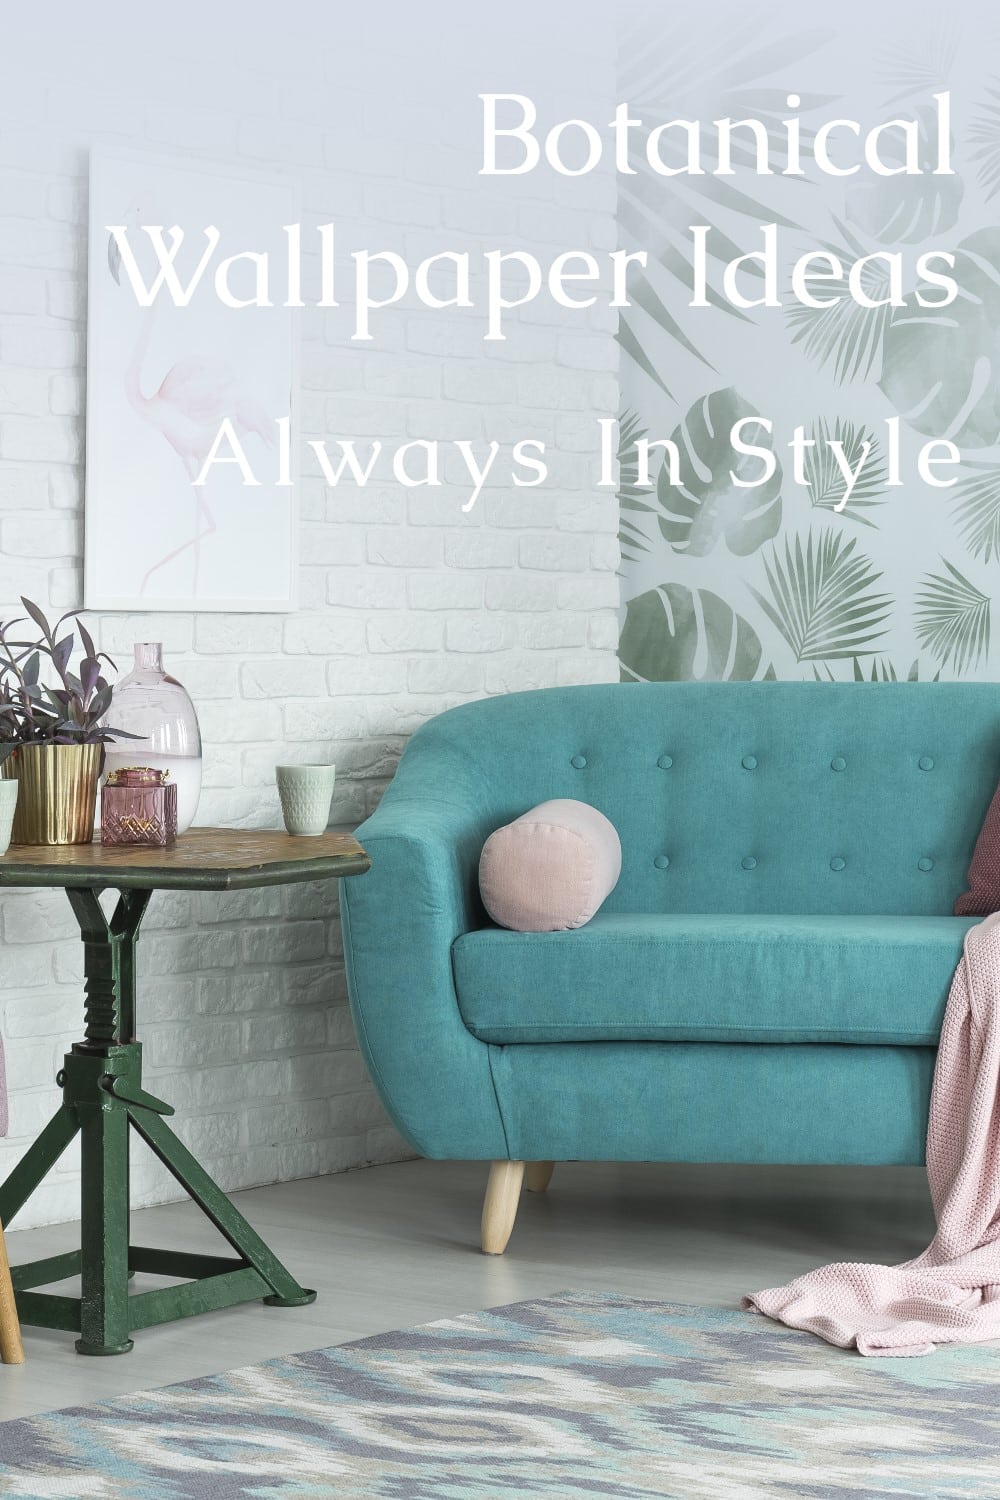 Floral or botanical wallpaper is a perennial favorite among homeowners and interior designers. Colors, styles and designs to inspire you. via @repurposedlife